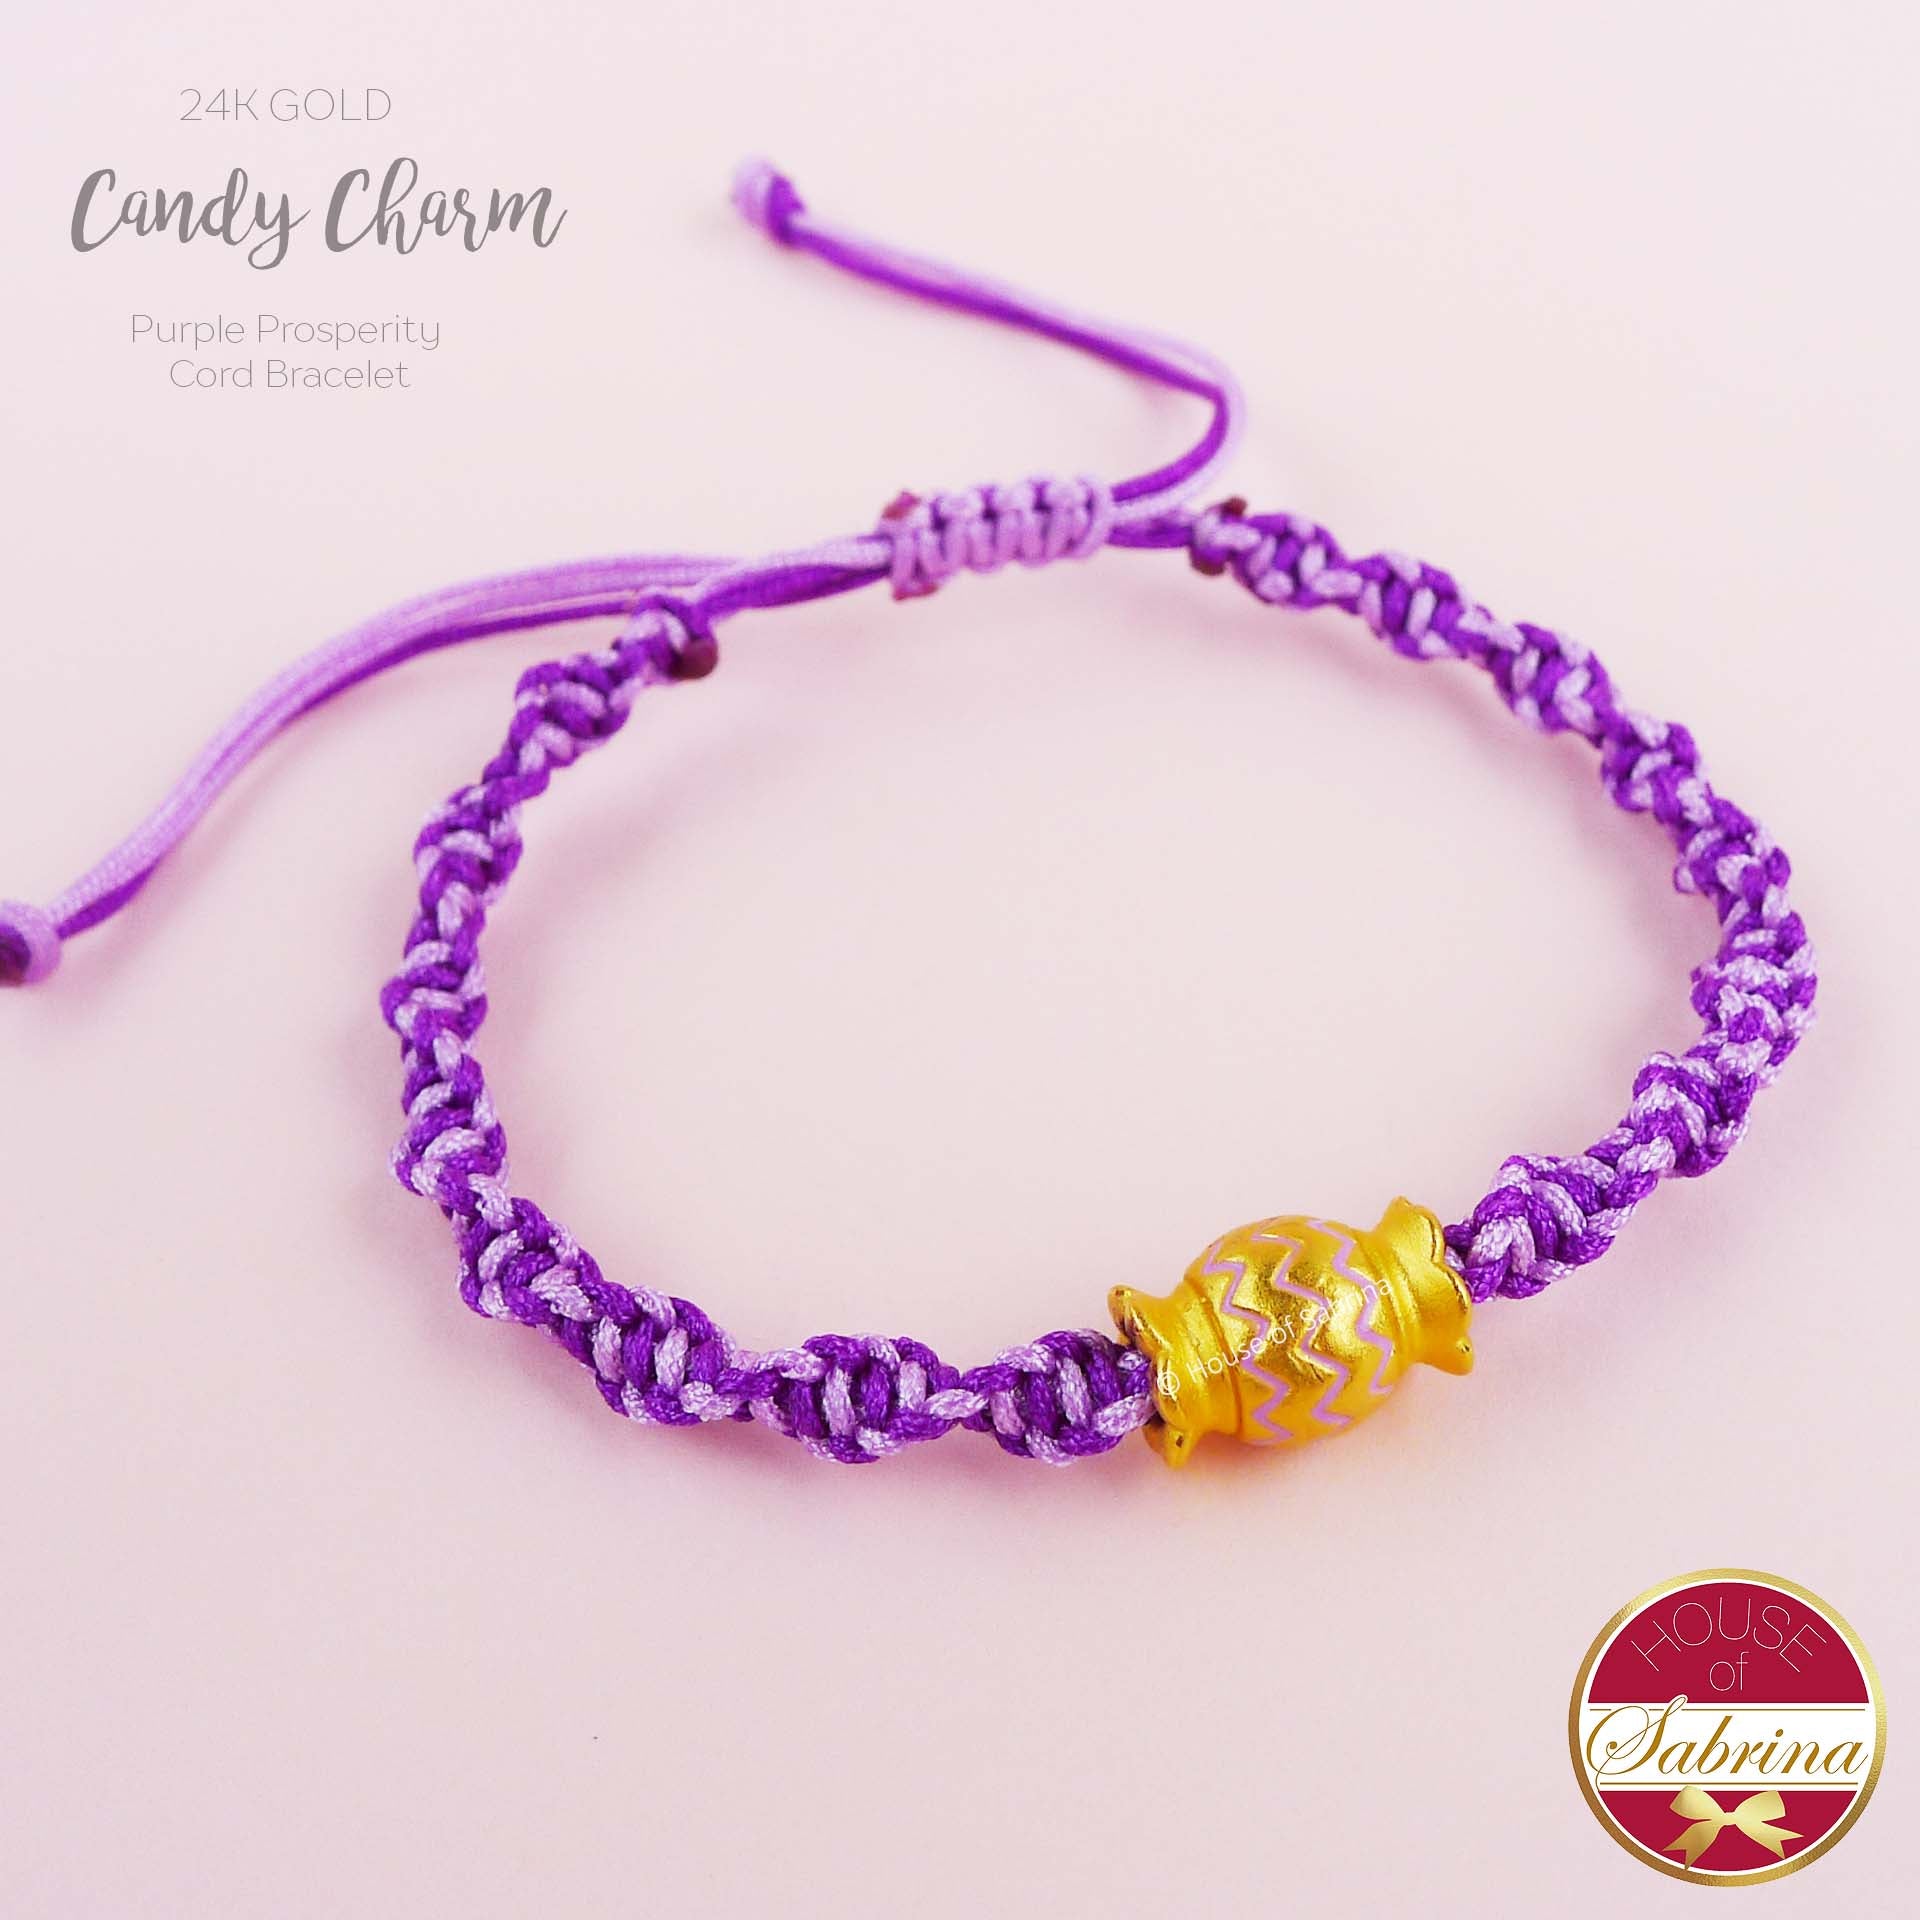 24K GOLD COLOURED CANDY CHARM ON PURPLE CORD LUCKY CHARM BRACELET